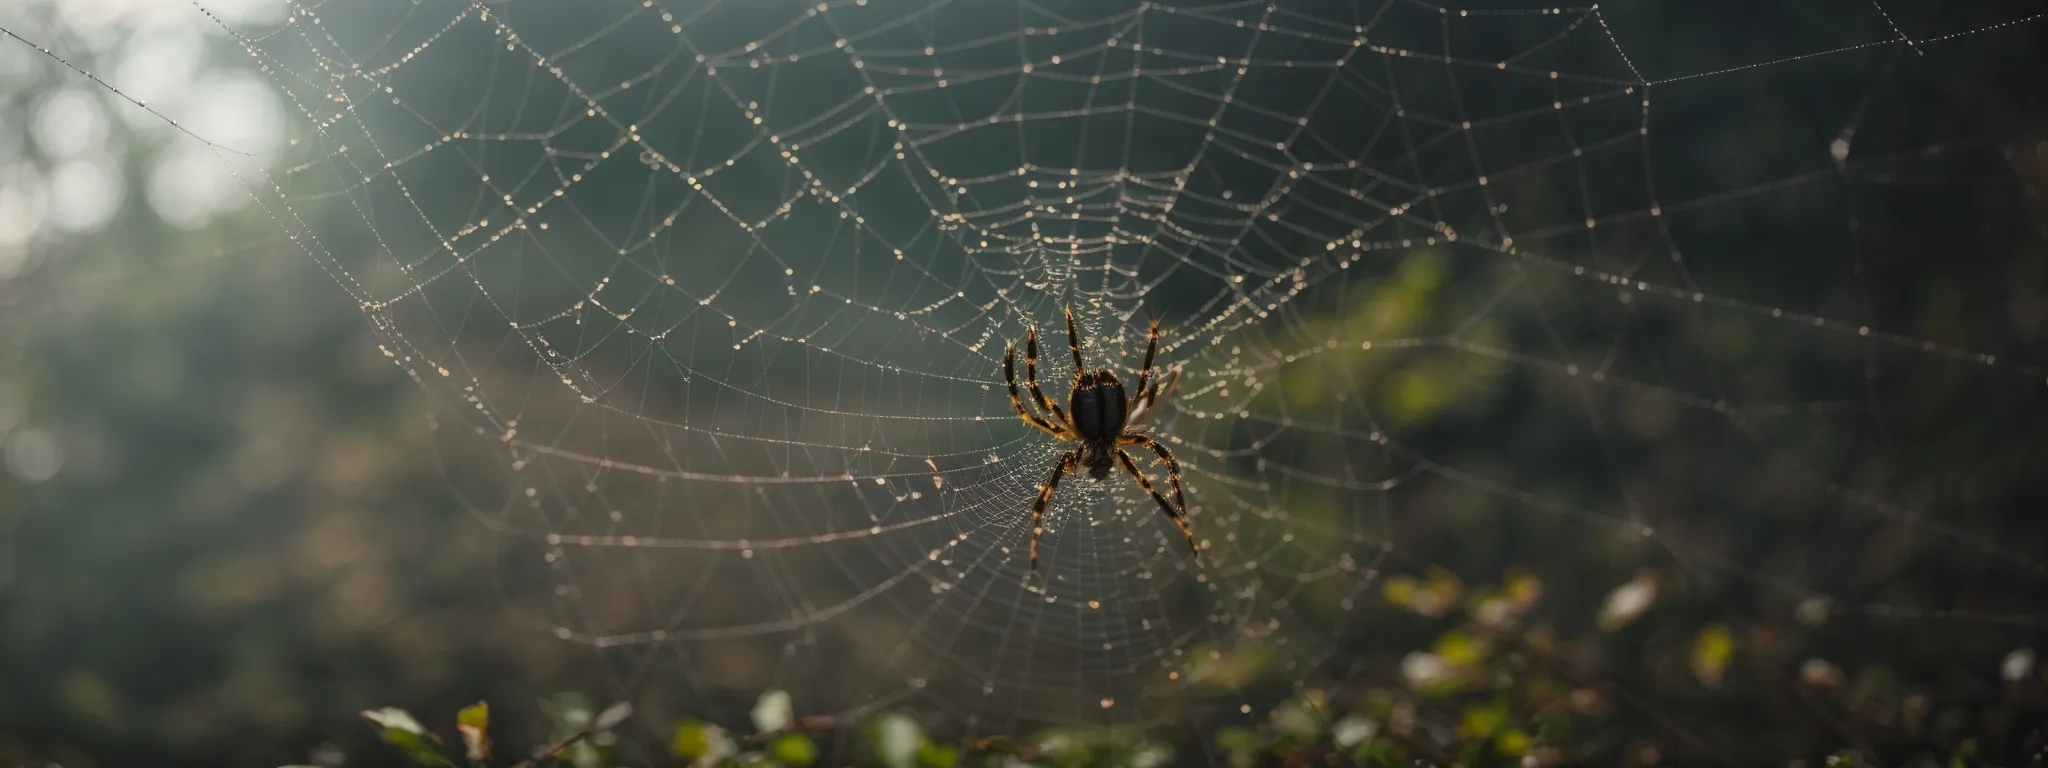 a close-up of a spider weaving its intricate web, exemplifying the complexity of building a strong and interconnected online presence.